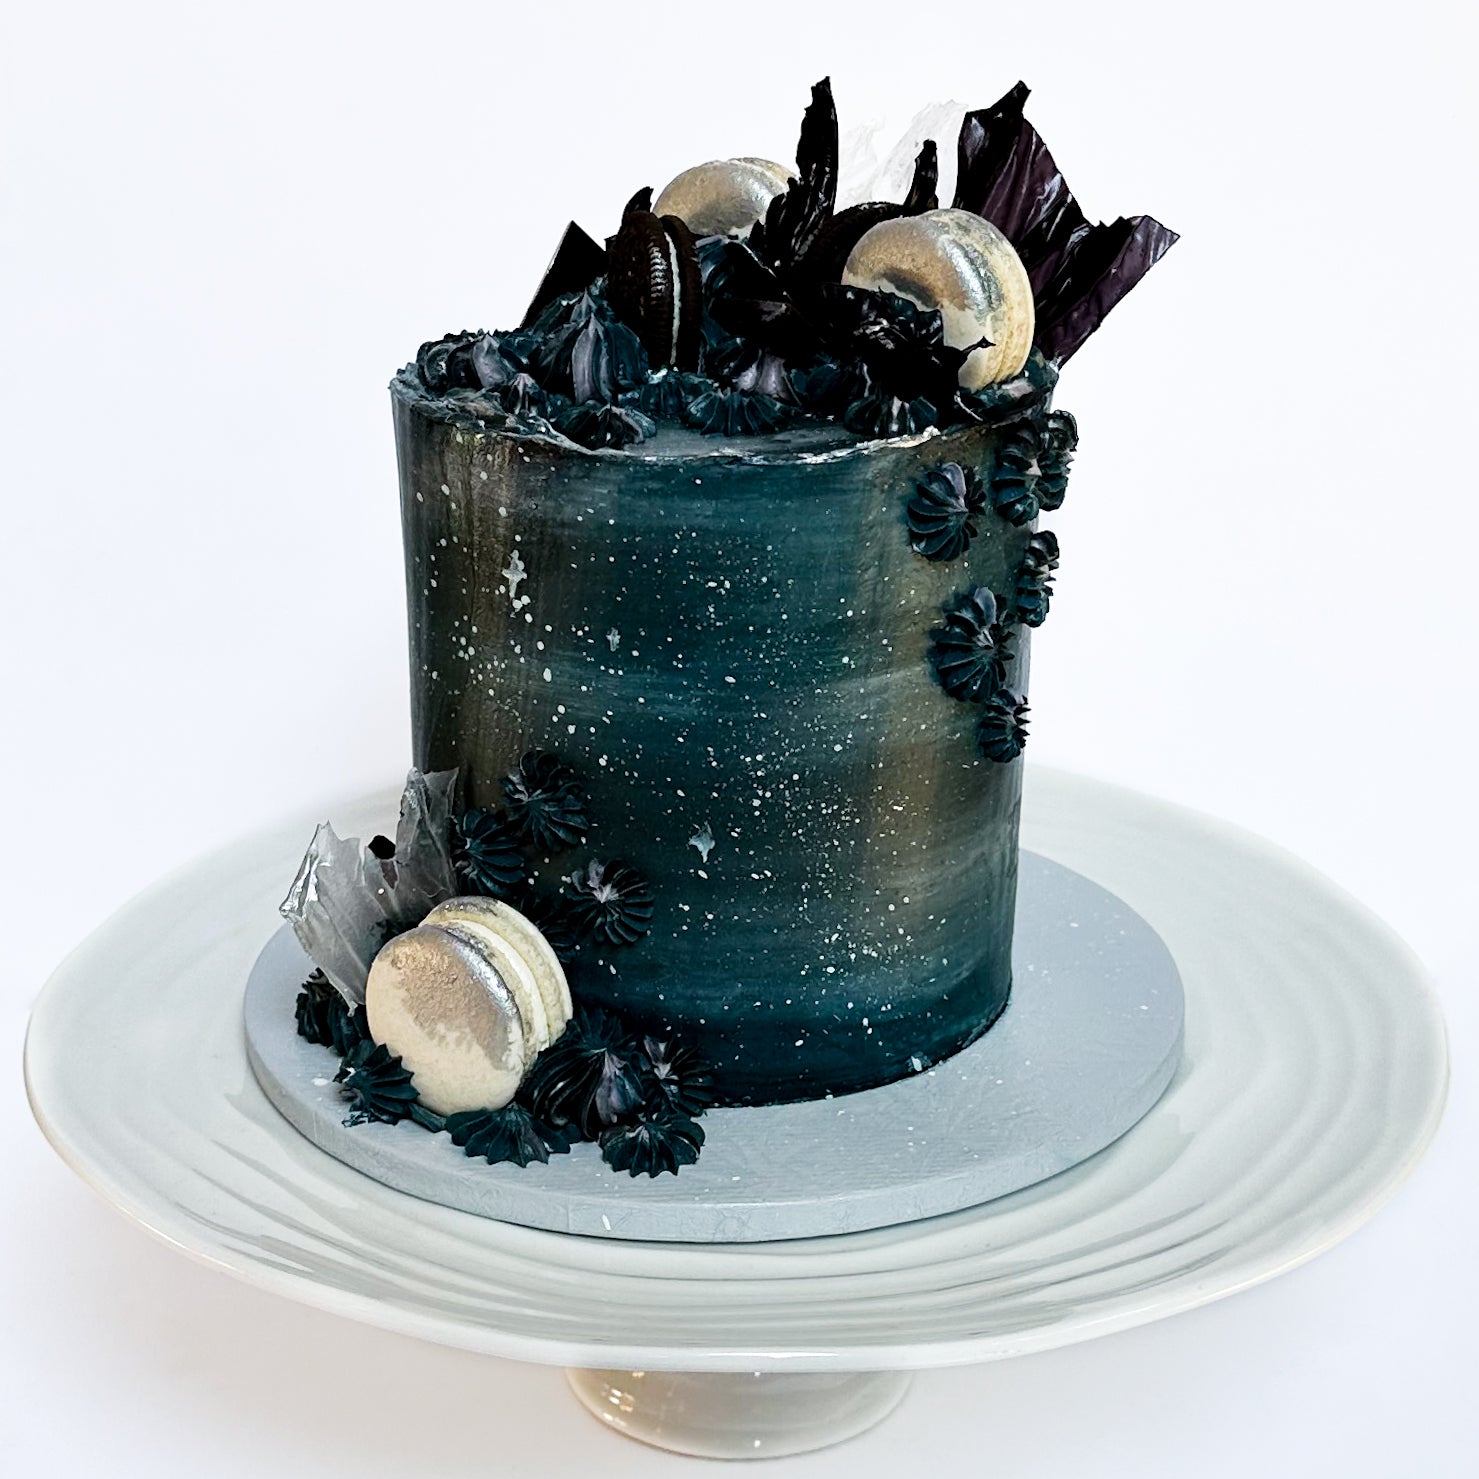 Galaxy themed cake with stars, macarons and biscuits